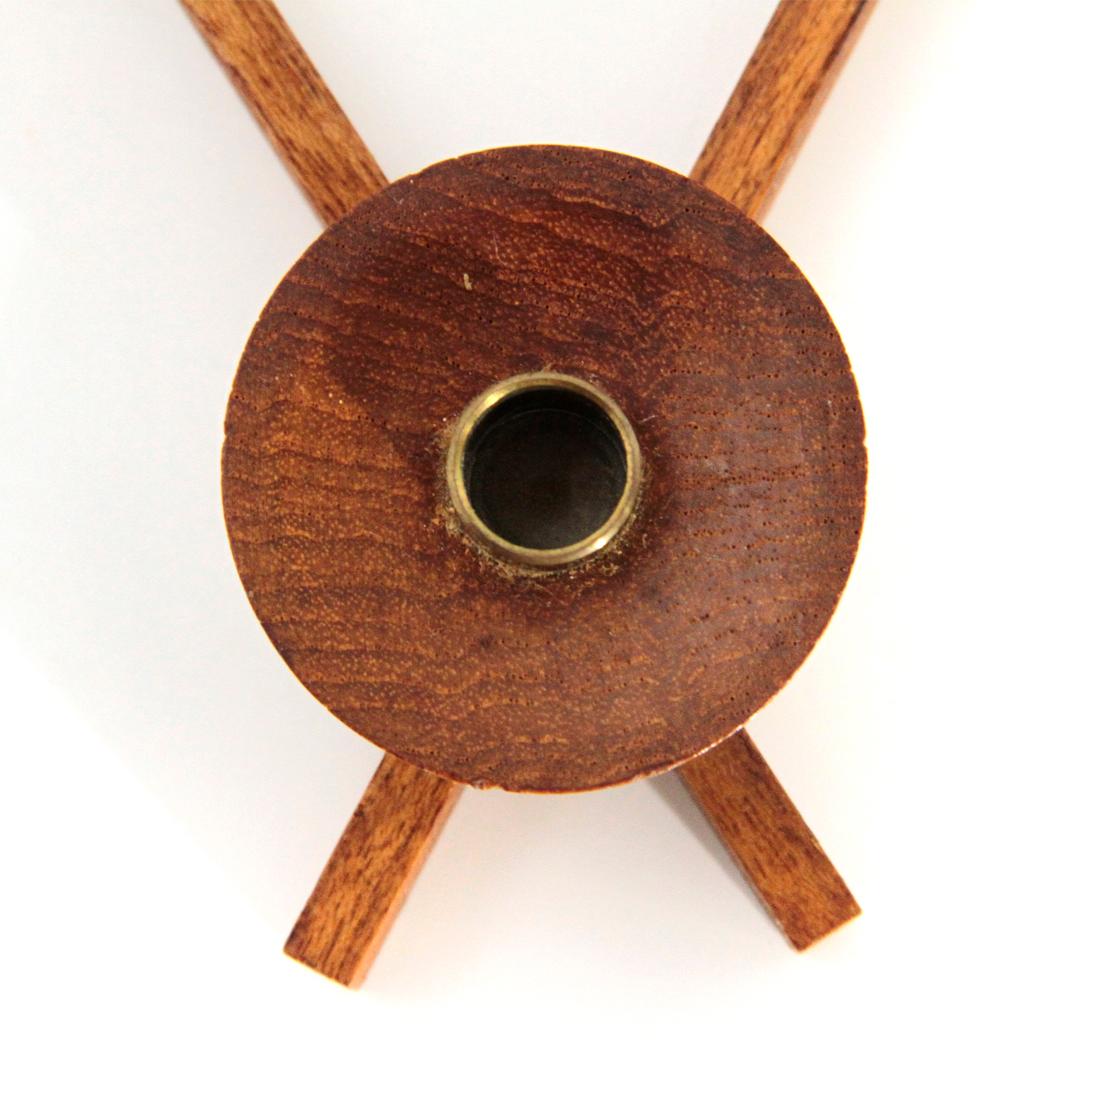 Midcentury Triangular Teak and Brass Italian Candleholder by Anri Form, 1960s For Sale 1